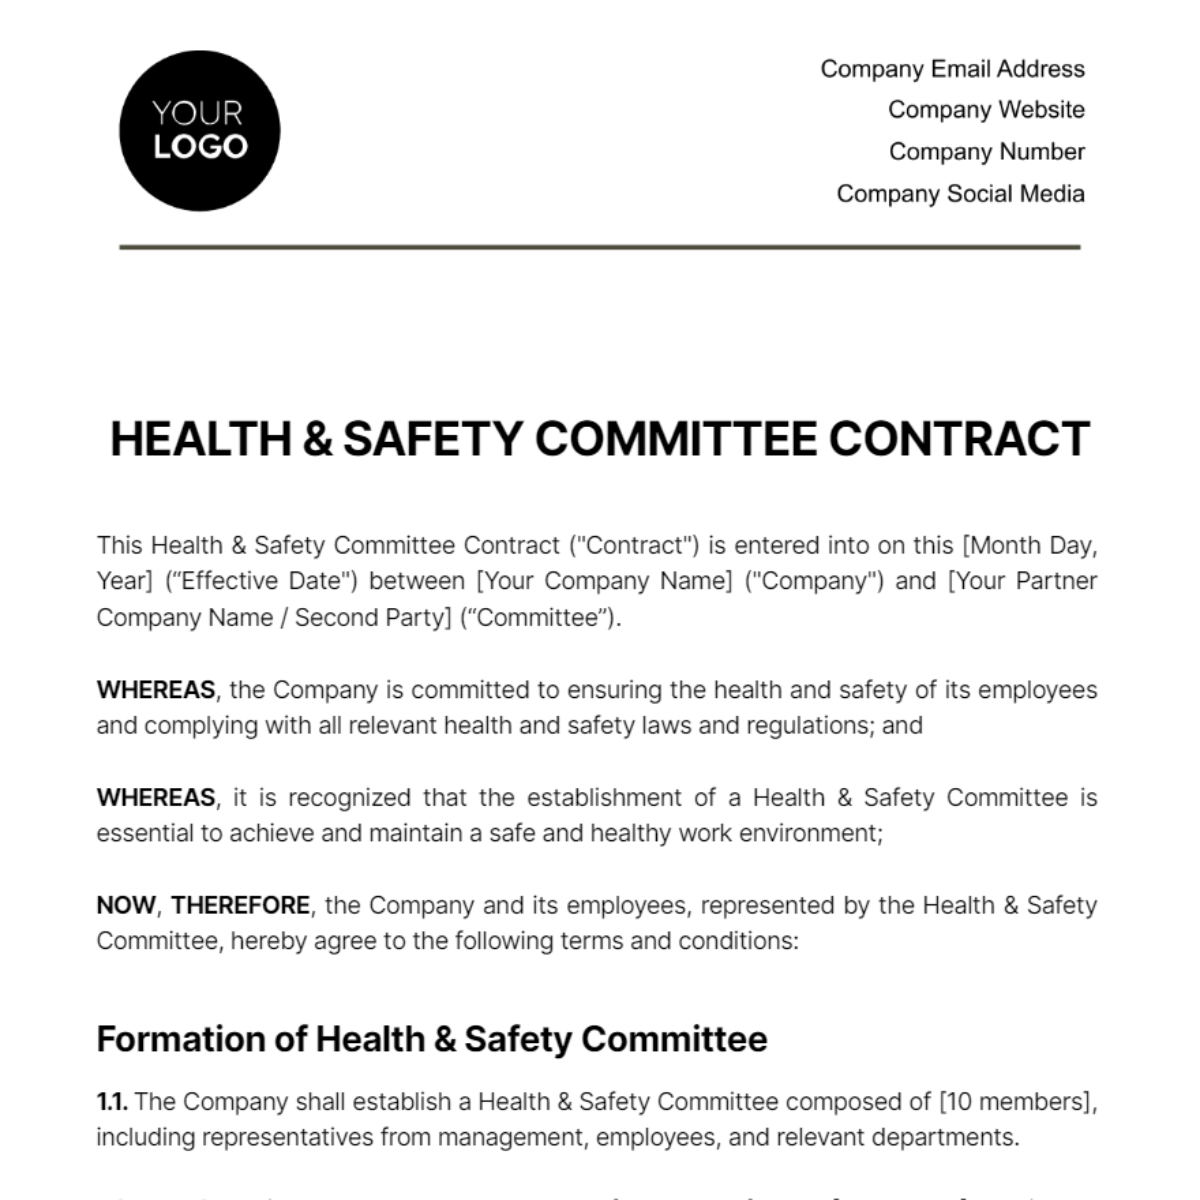 Health & Safety Committee Contract Template